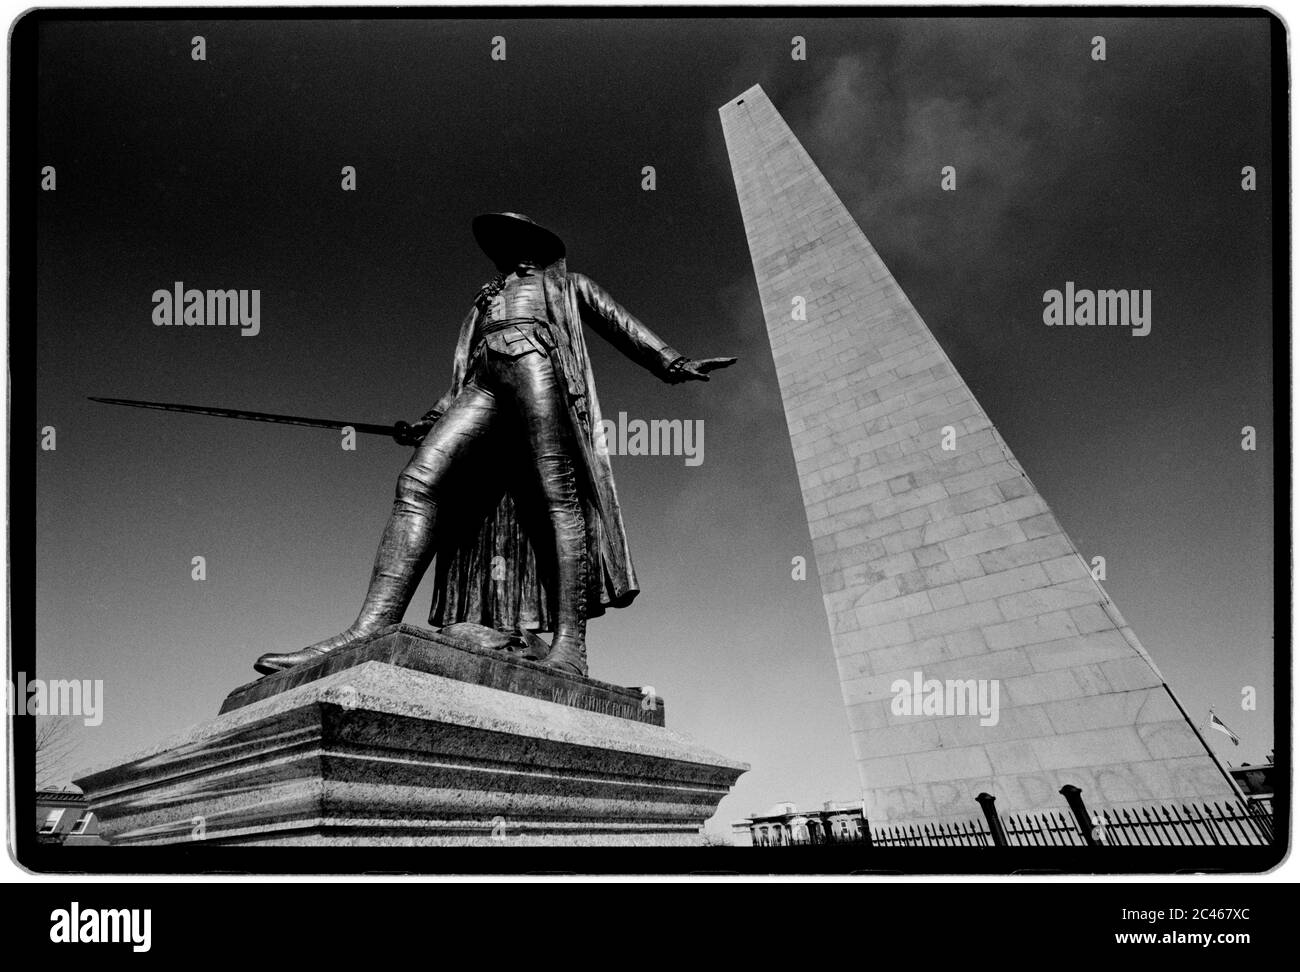 Bunker Hill Monument and Statue of Dr Joseph Warren Boston USA 1988 The Bunker Hill Monument was erected to commemorate the Battle of Bunker Hill, which was among the first major battles between British and Patriot forces in the American Revolutionary War, fought there June 17, 1775. The 221-foot (67 m) granite obelisk was erected between 1825 and 1843 in Charlestown, Massachusetts, with granite from nearby Quincy conveyed to the site via the purpose-built Granite Railway, followed by a trip by barge. There are 294 steps to the top.  An exhibit lodge built near the base of the monument in the Stock Photo